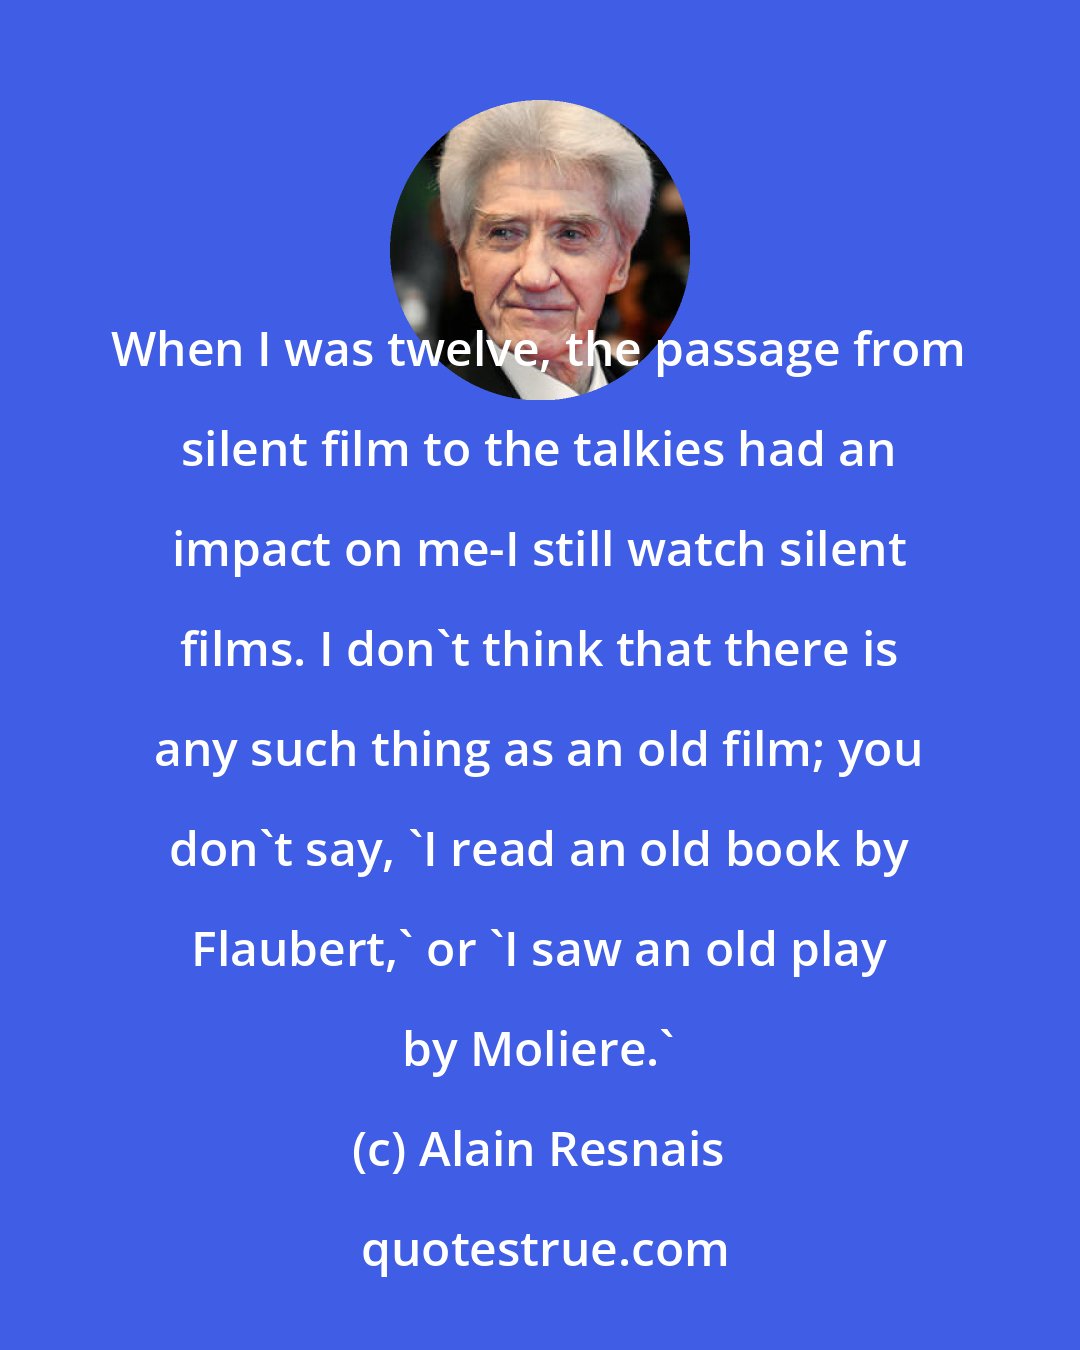 Alain Resnais: When I was twelve, the passage from silent film to the talkies had an impact on me-I still watch silent films. I don't think that there is any such thing as an old film; you don't say, 'I read an old book by Flaubert,' or 'I saw an old play by Moliere.'